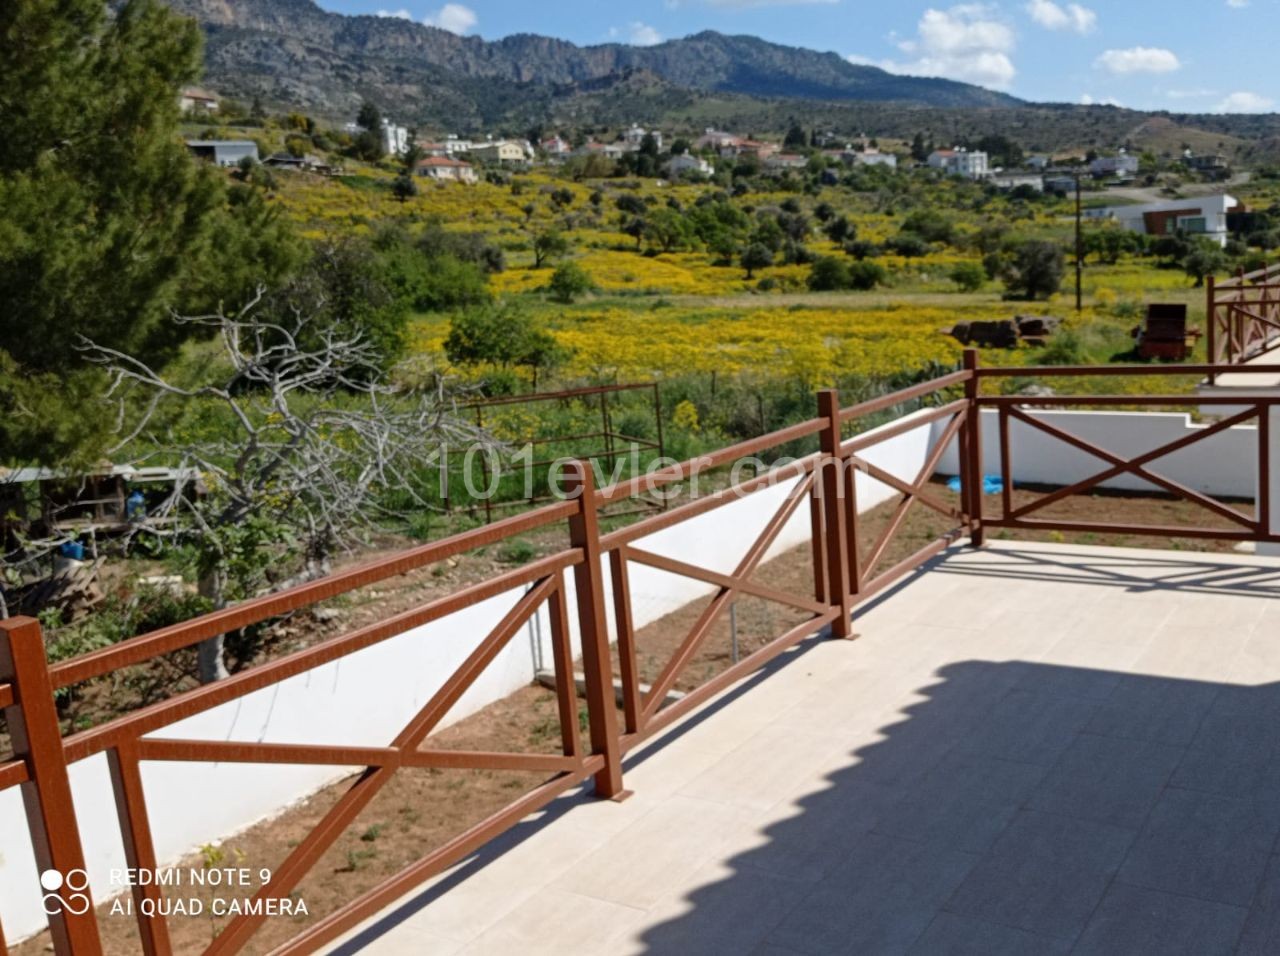 Villa for sale in excellent location, a scrumptious view of Cyprus